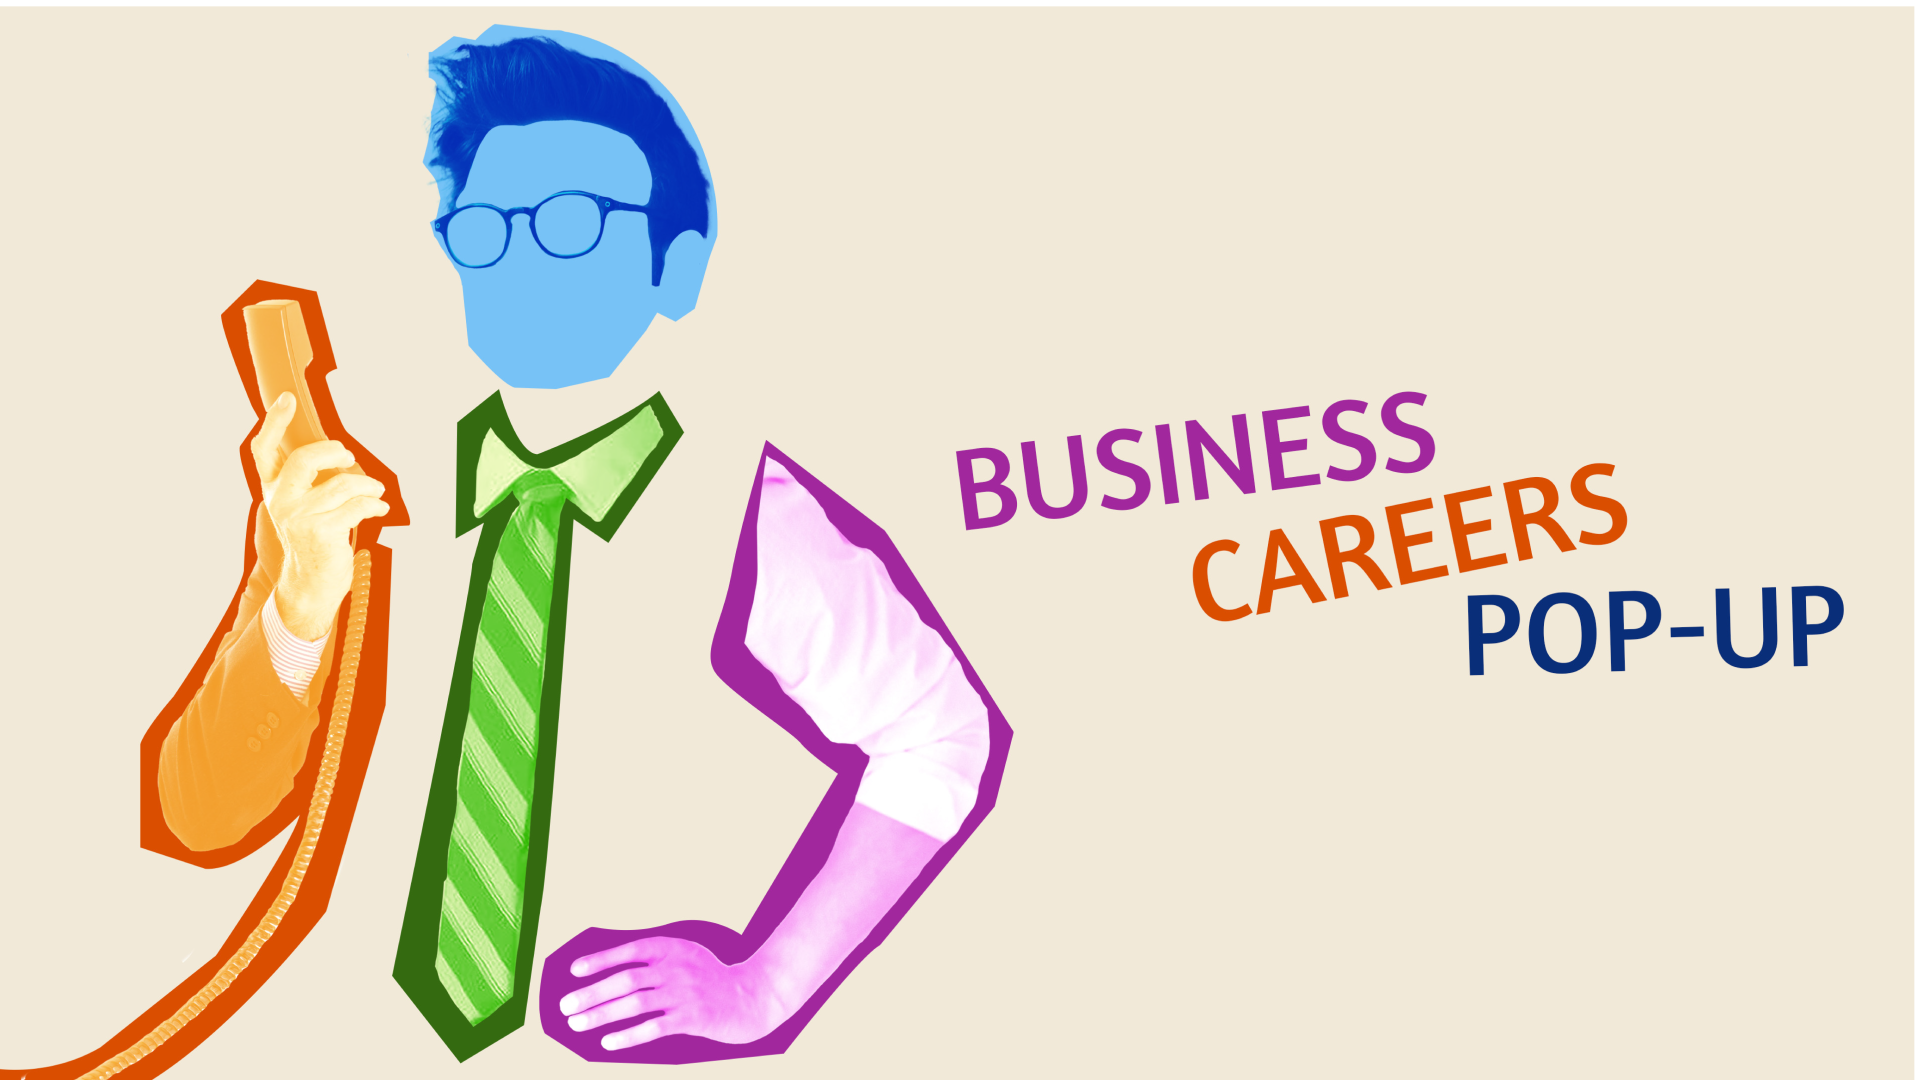 Business Careers Pop-Up